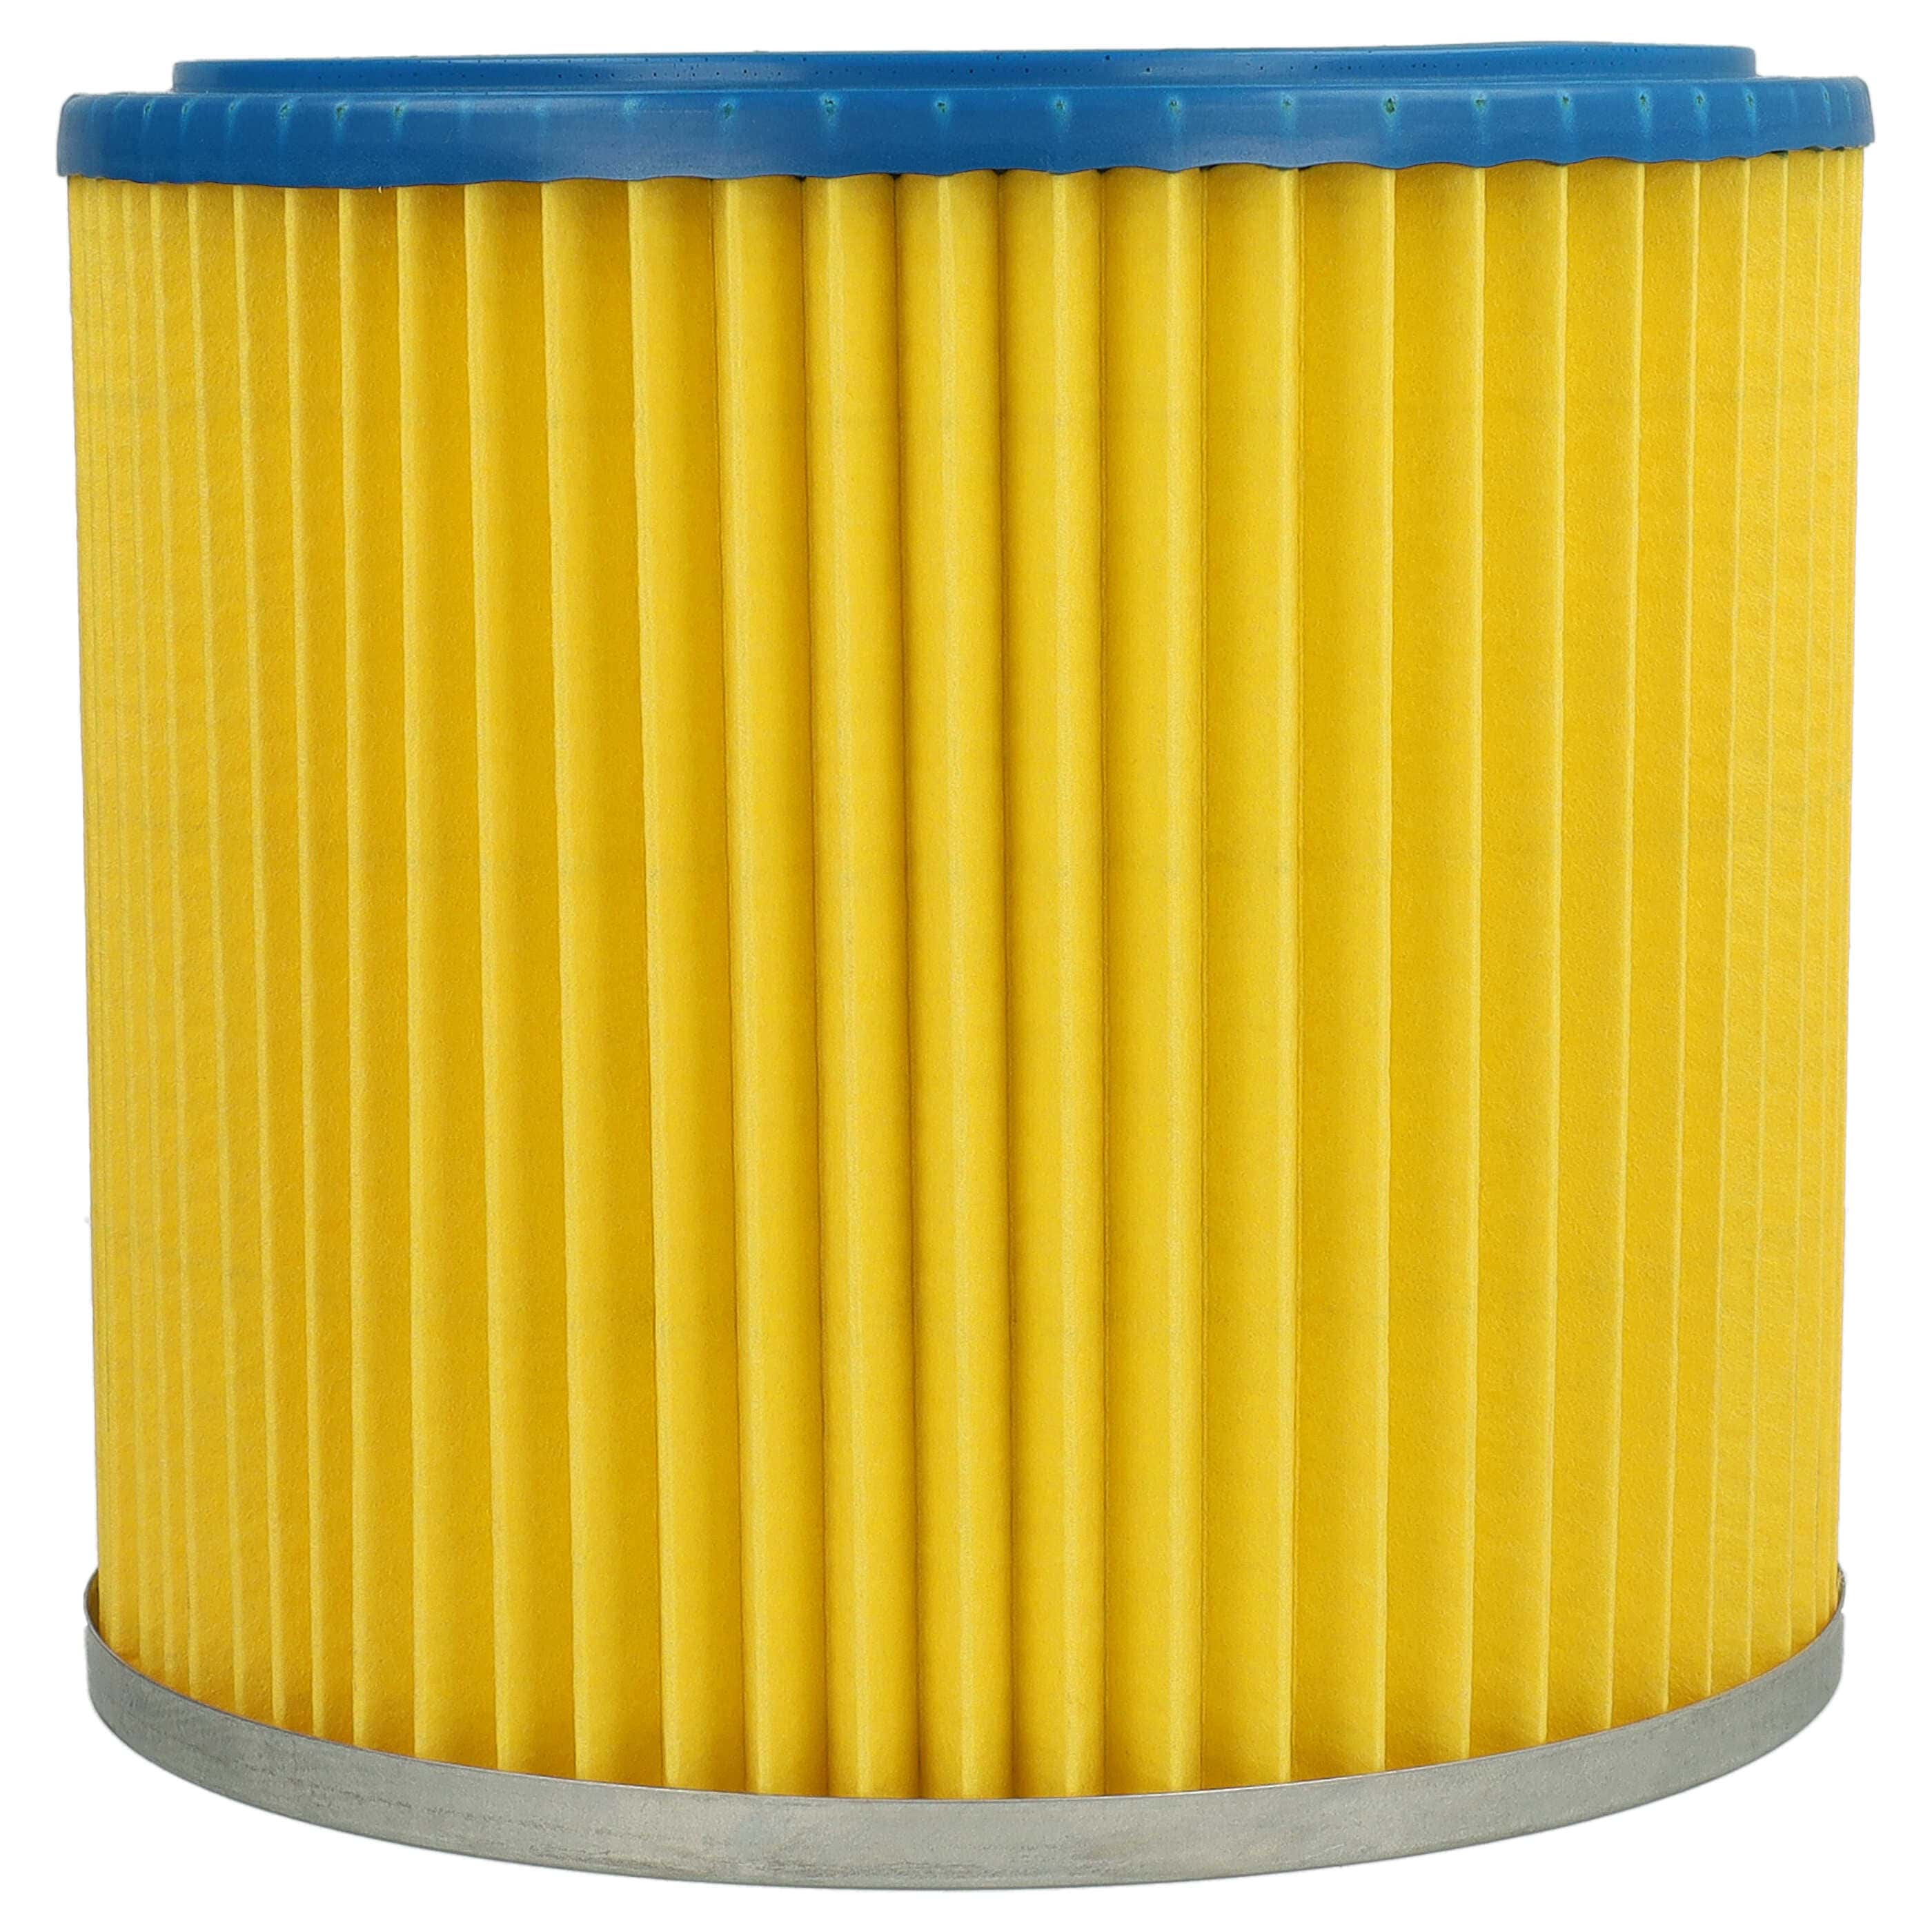 1x cartridge filter replaces Einhell 2351110 for LIVVacuum Cleaner, blue / yellow